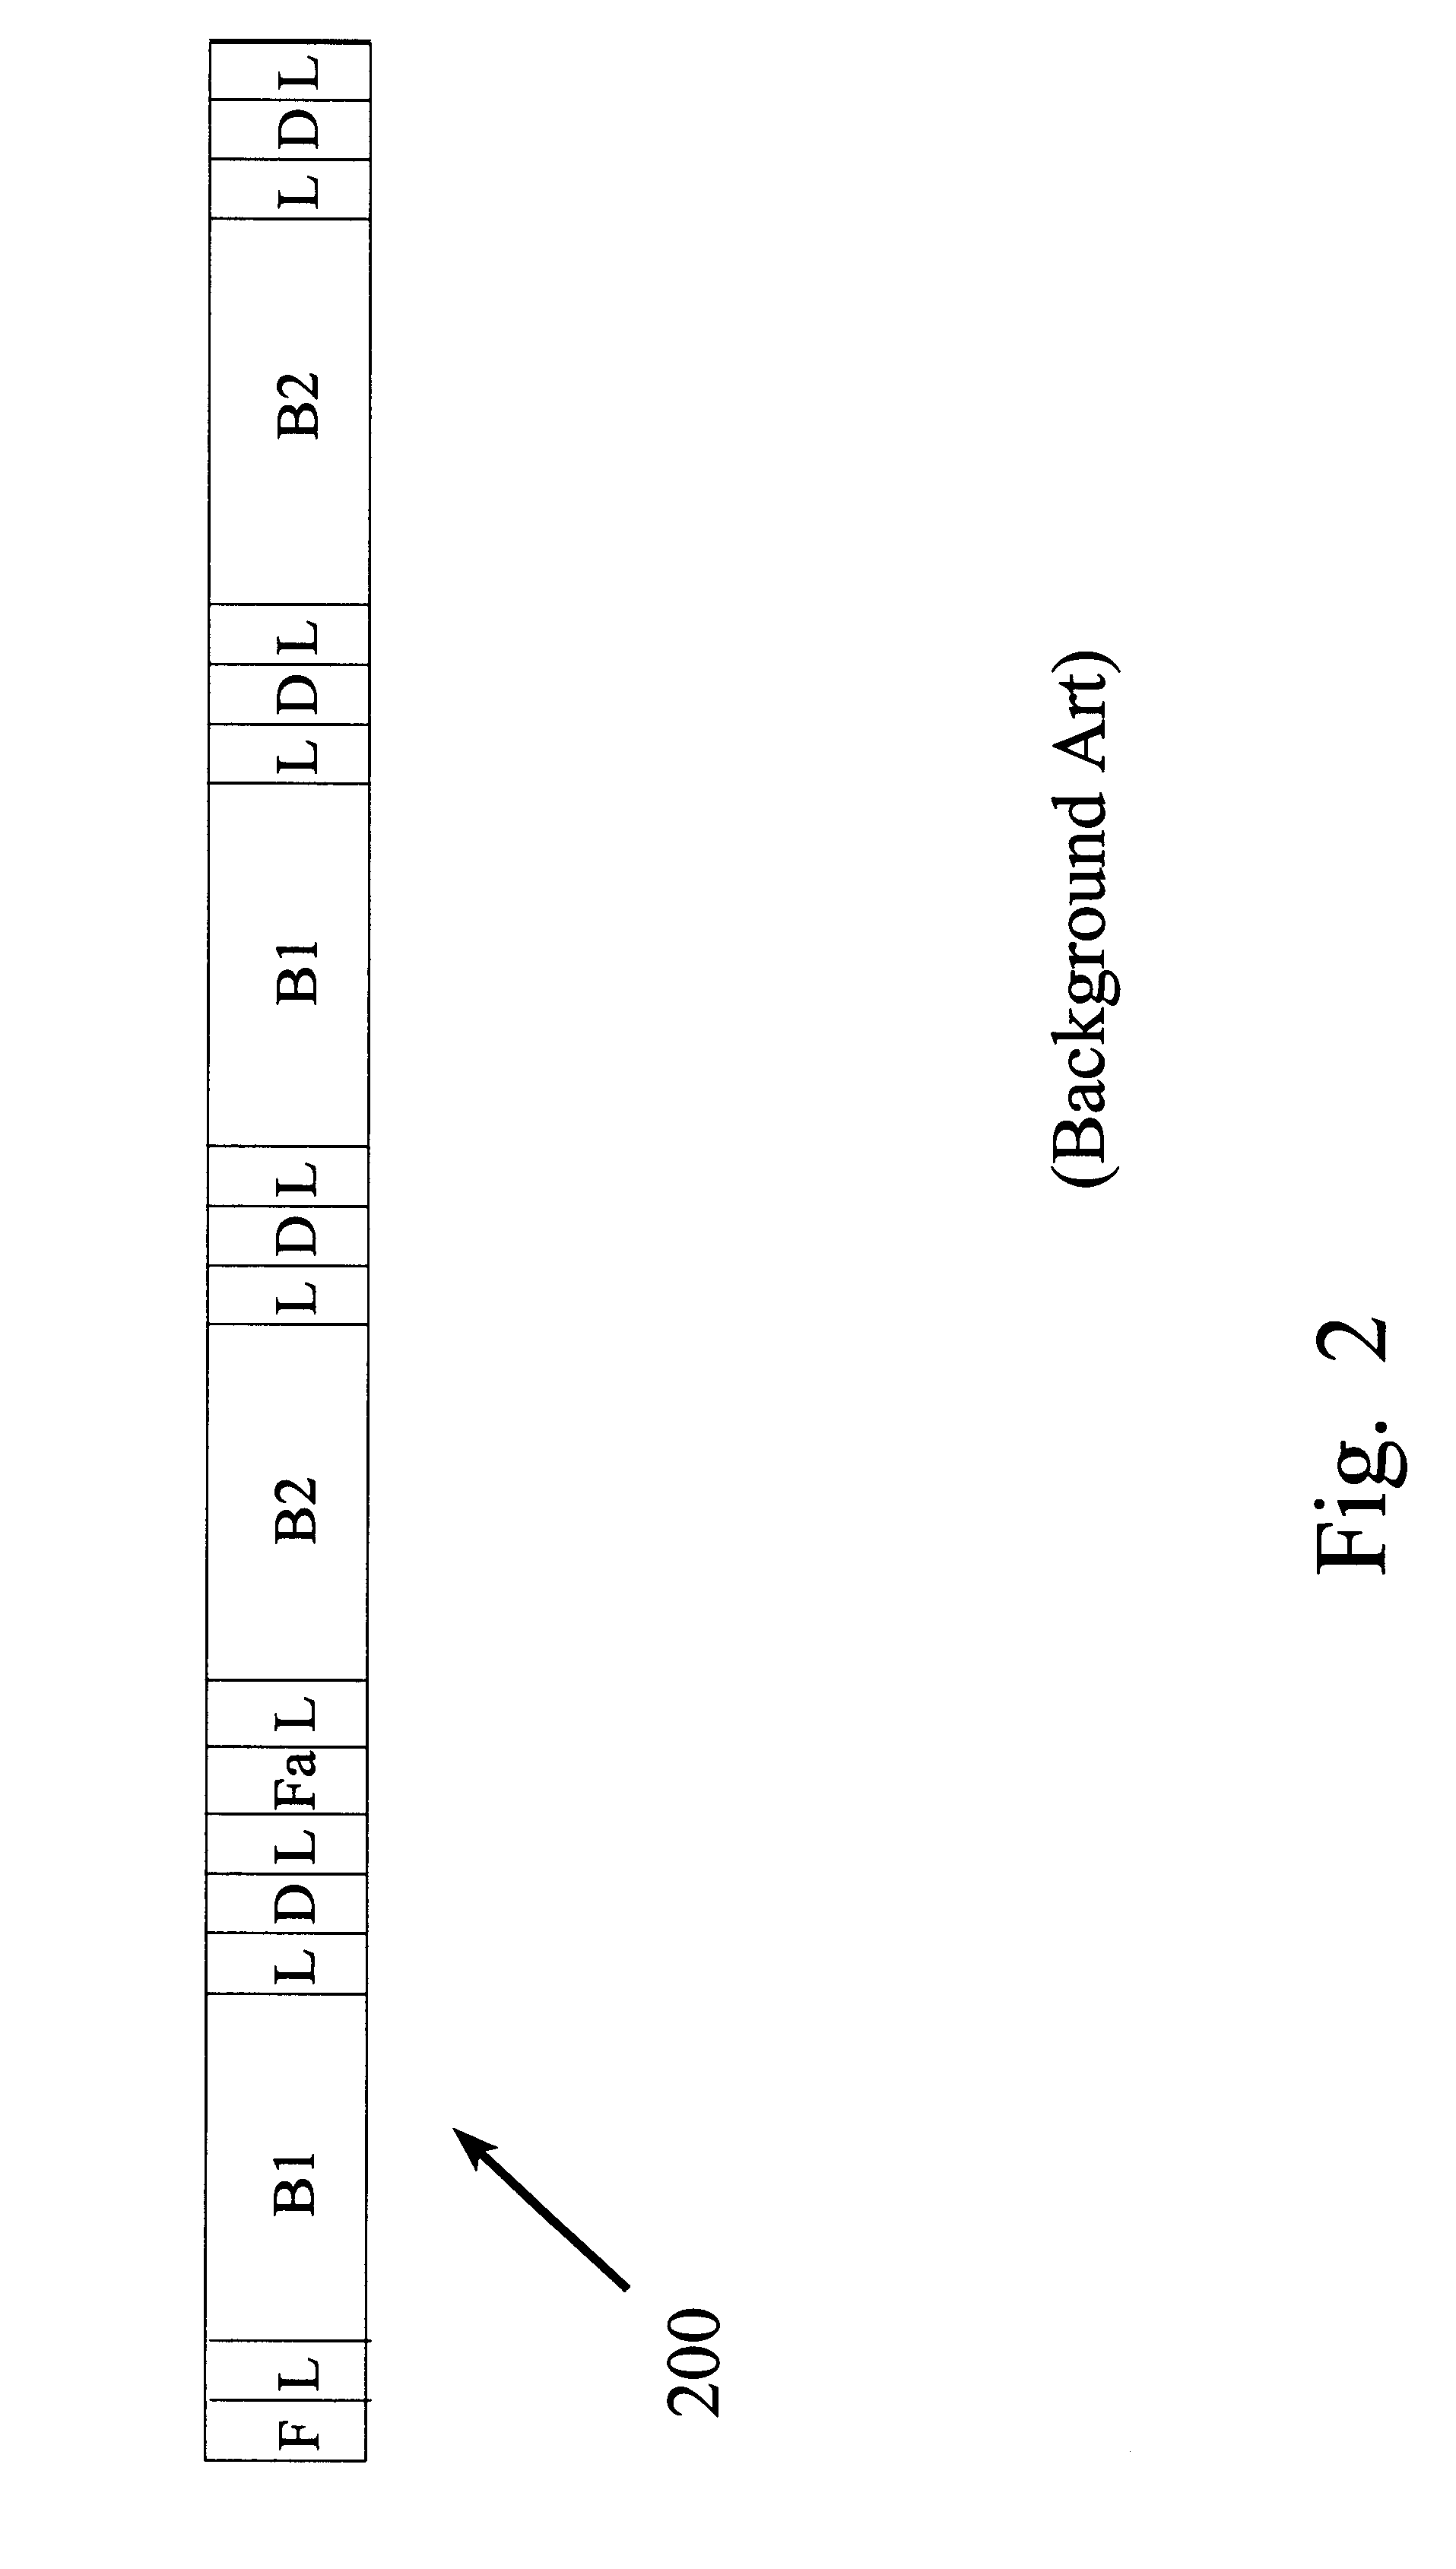 Method and apparatus for sending a 1xN communication message